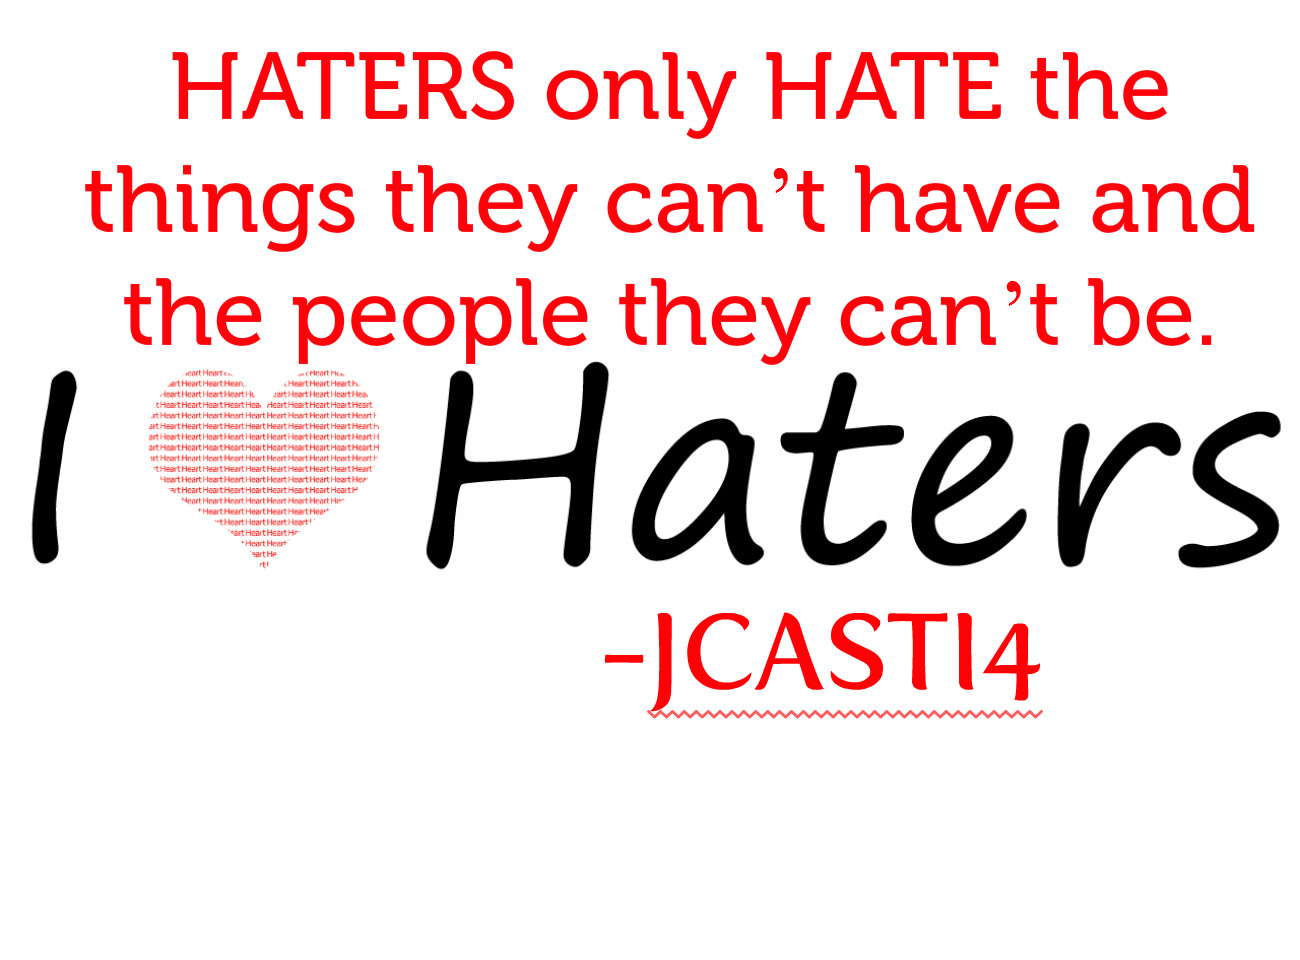 Only hates